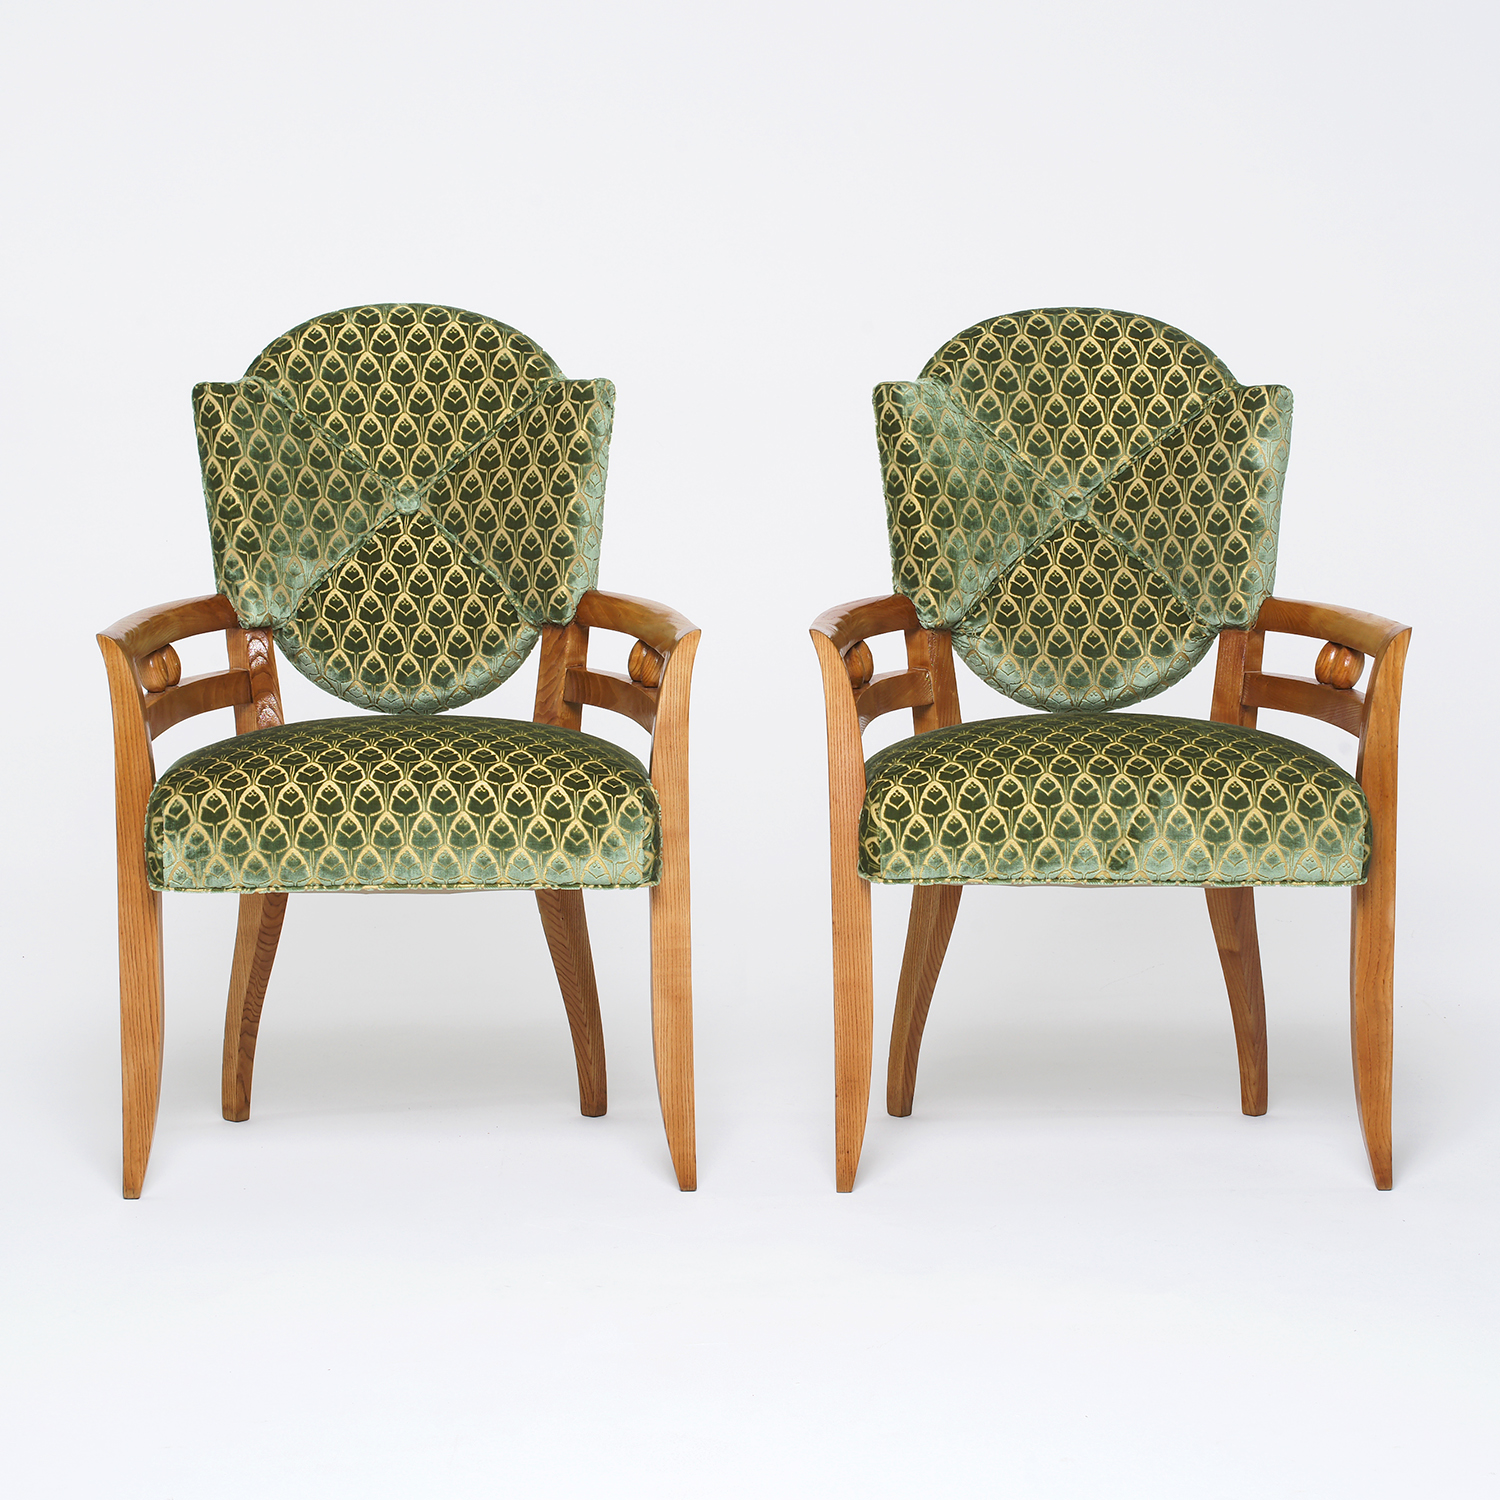 20th Century Pair of French Vintage Art Deco Oakwood Armchairs by André Arbus